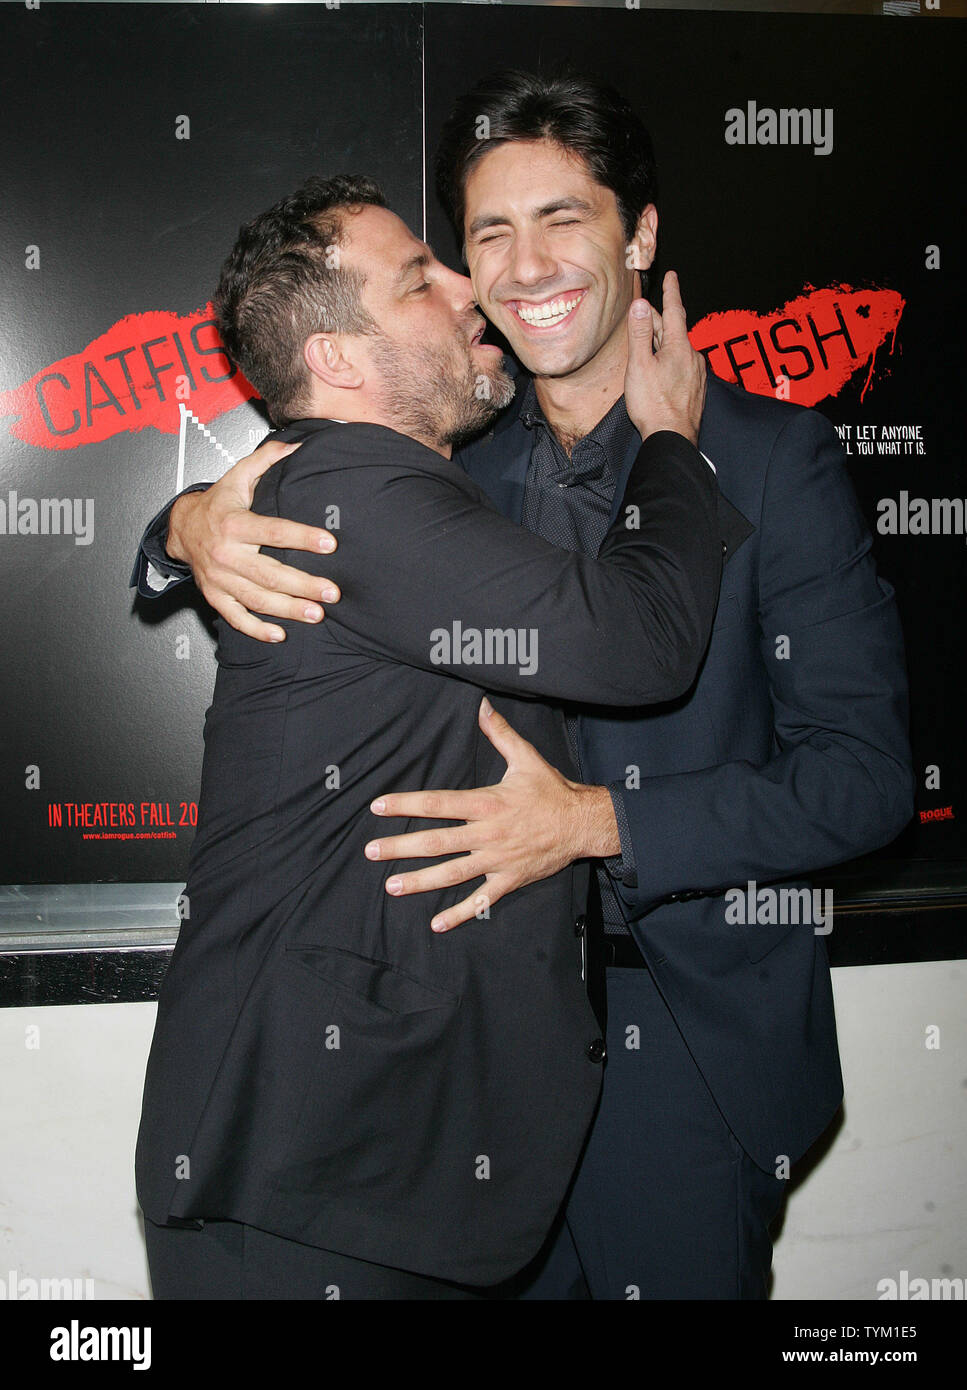 Brett Ratner and Nev Schulman arrive for the premiere of 'Catfish' at the Paris Theatre in New York on September 13, 2010.       UPI /Laura Cavanaugh Stock Photo